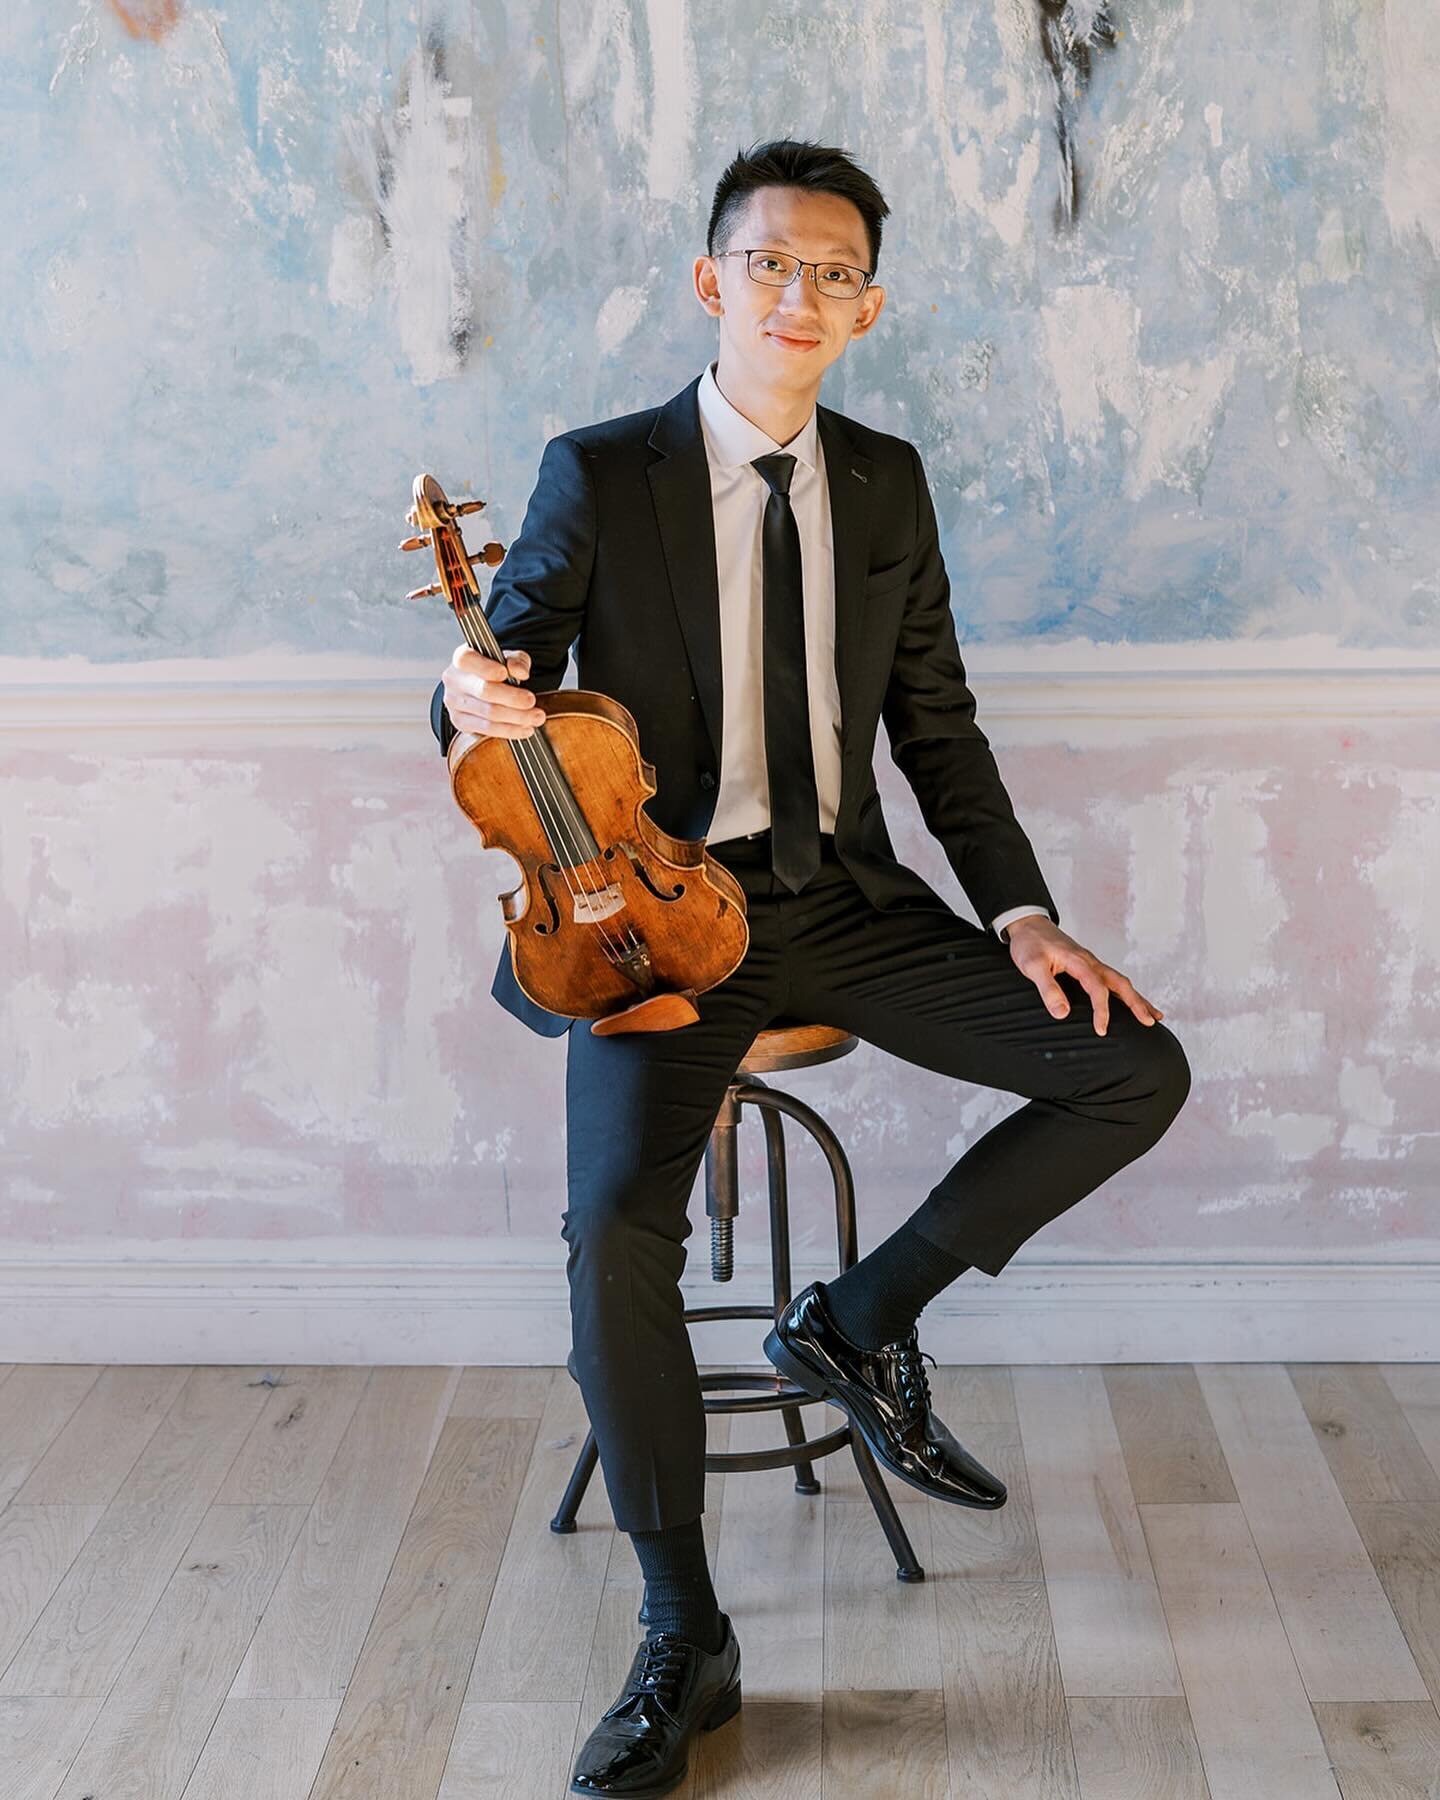 Wishing the happiest of birthdays to our violist Chih-Ta, our resident meme king, cat whisperer, mahjong expert, and macaron-bringer! 

📸 @sophiekayephotography